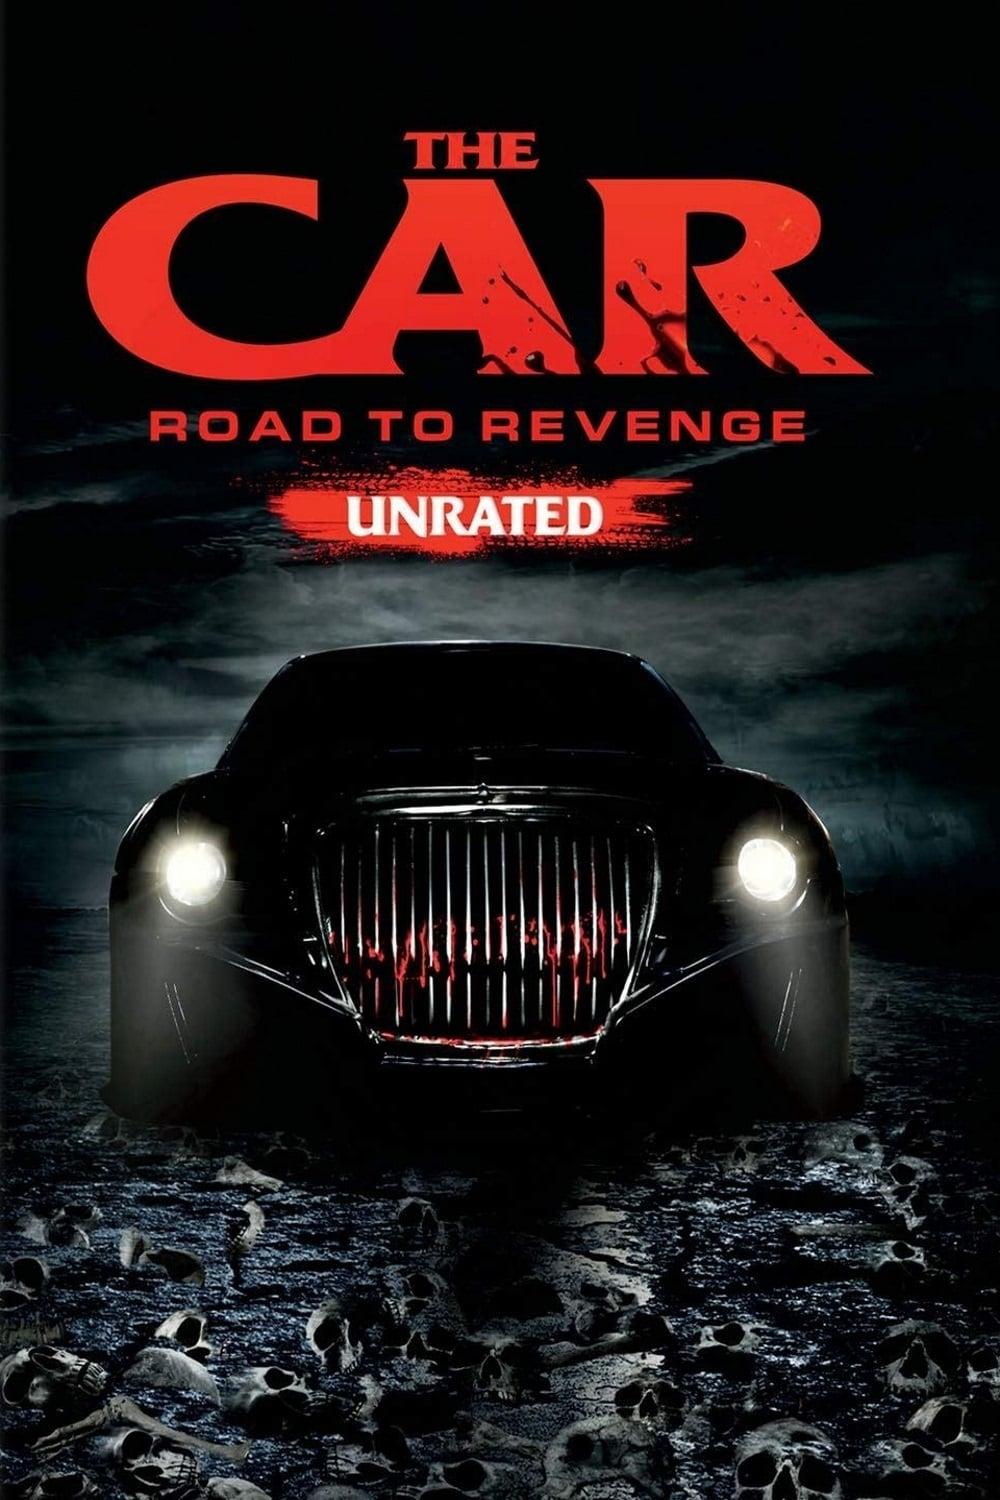 The Car: Road to Revenge poster